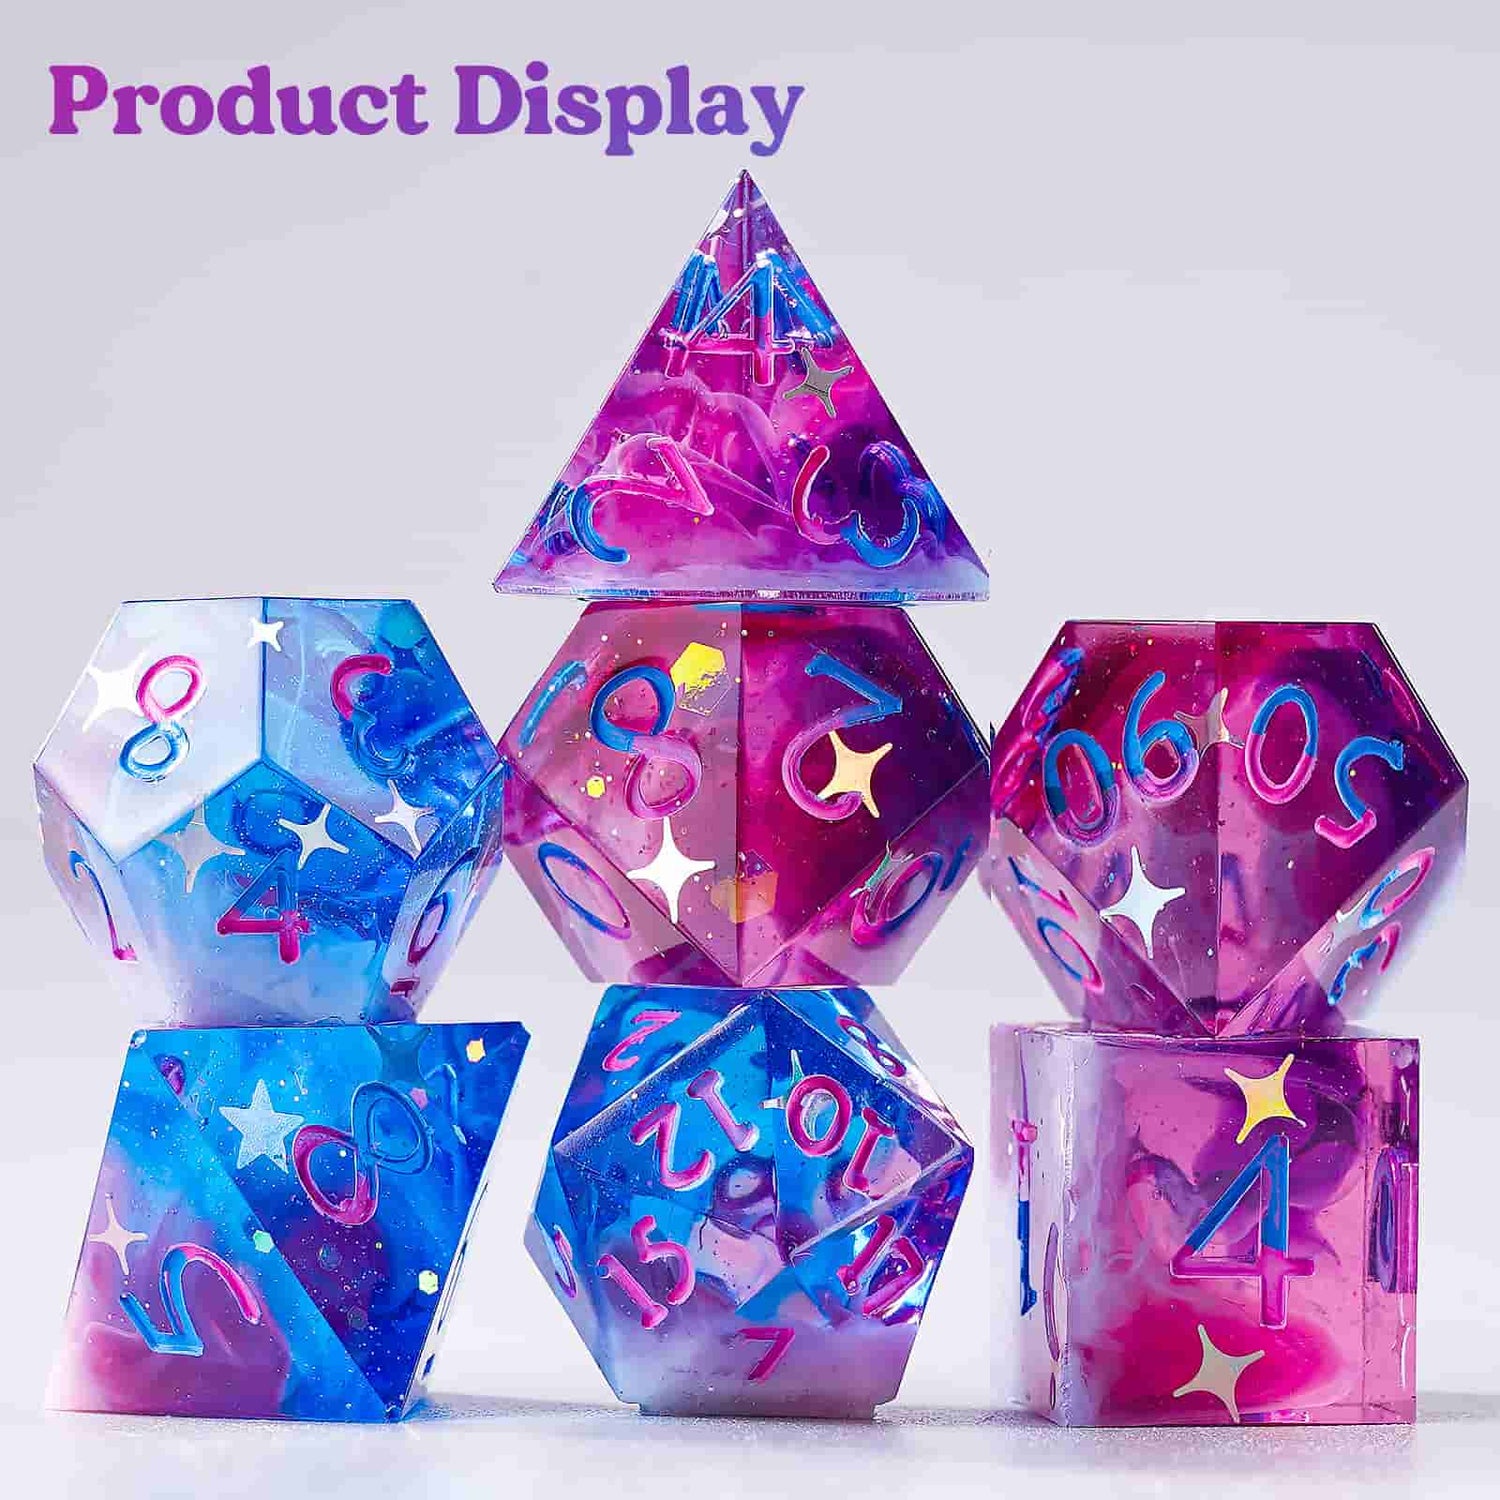 Dice Resin Mold, Polyhedral Game Dice Molds, Multi-Faceted Dice Mold 1PC